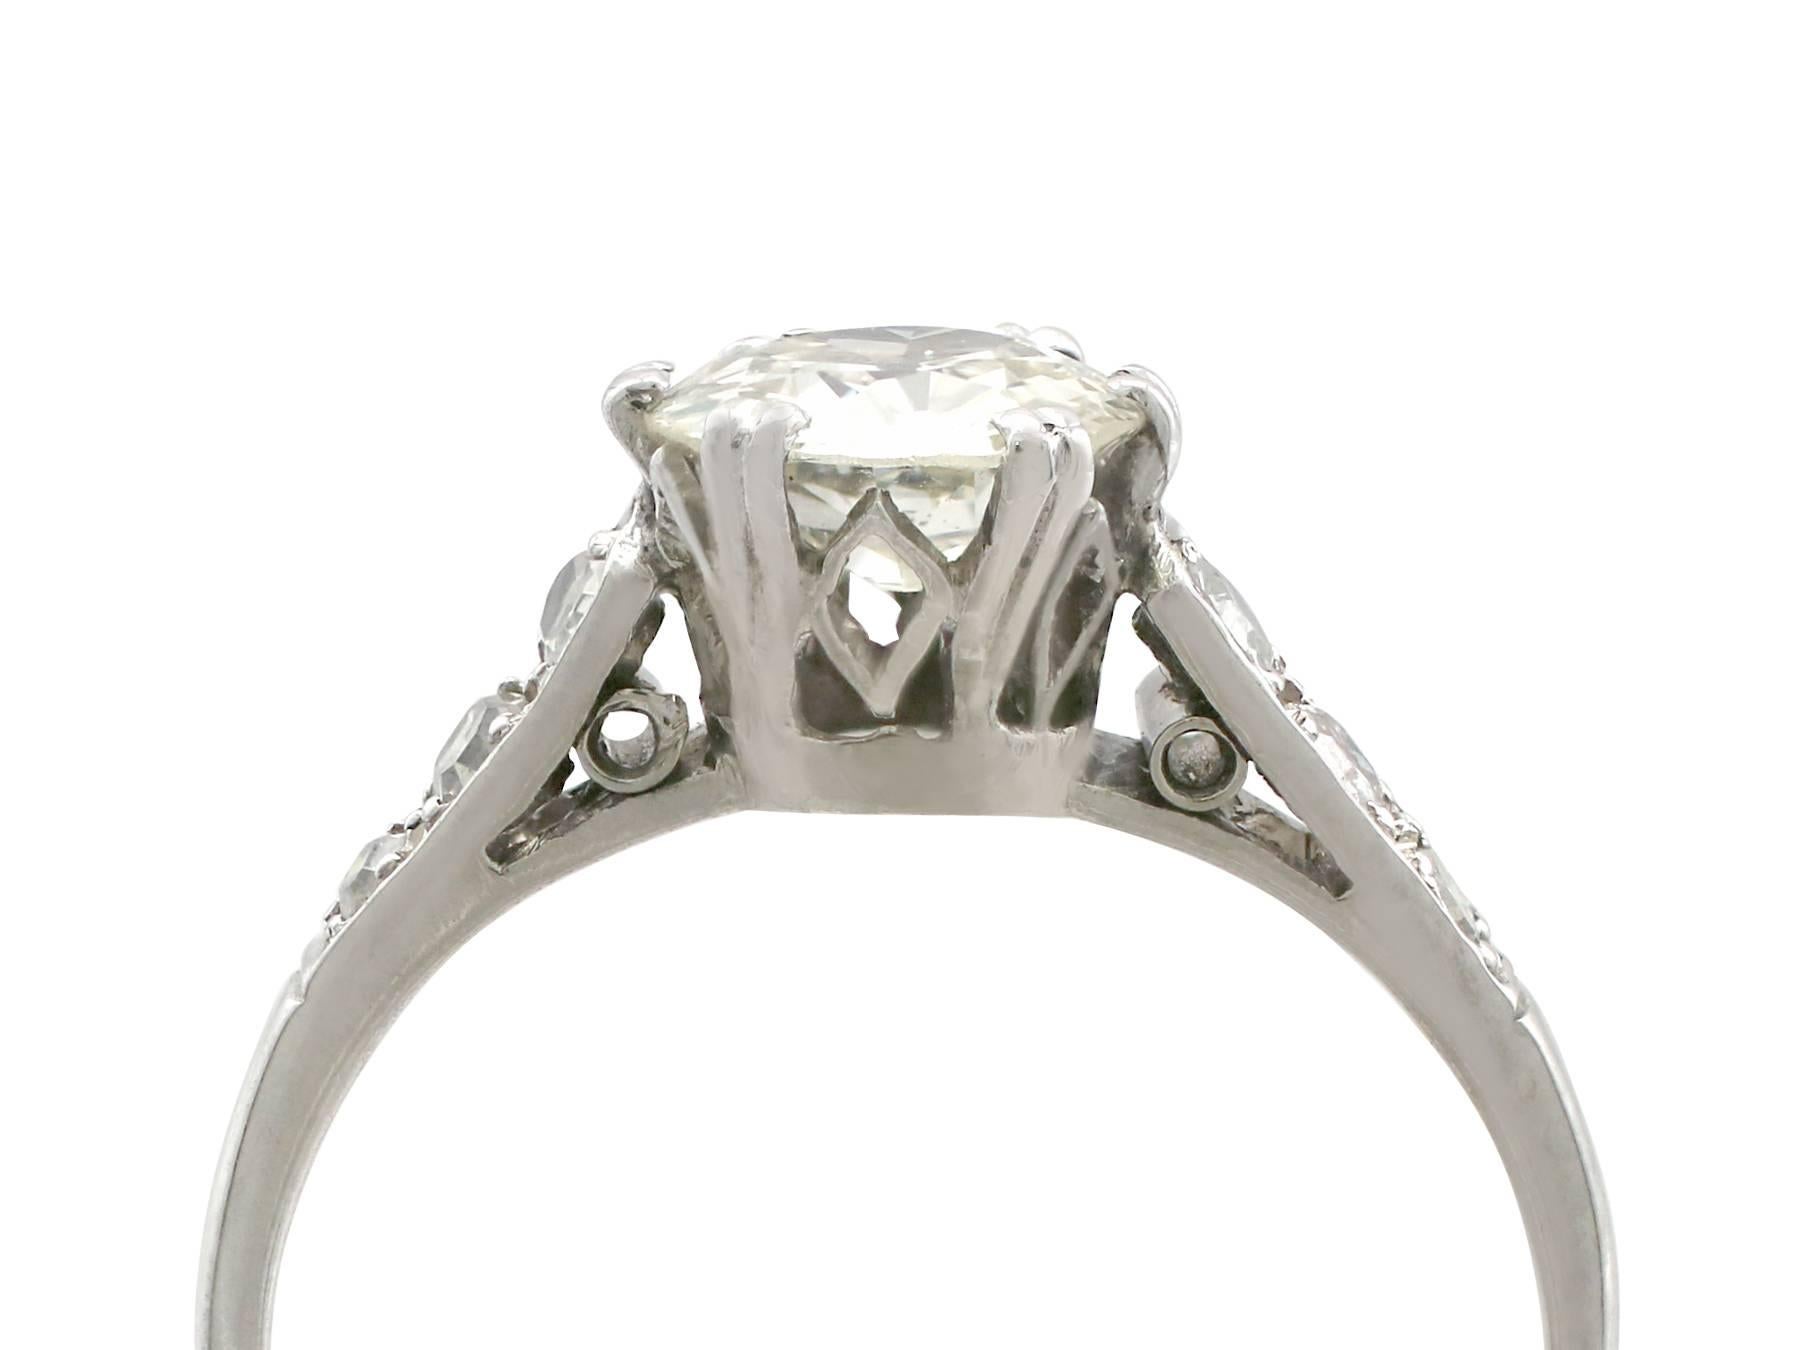 An impressive 1.02 carat diamond and platinum solitaire ring with 0.12 carat diamond accents; part of our diverse antique jewelry and estate jewelry collections

This fine and impressive 1930's diamond engagement ring has been crafted in